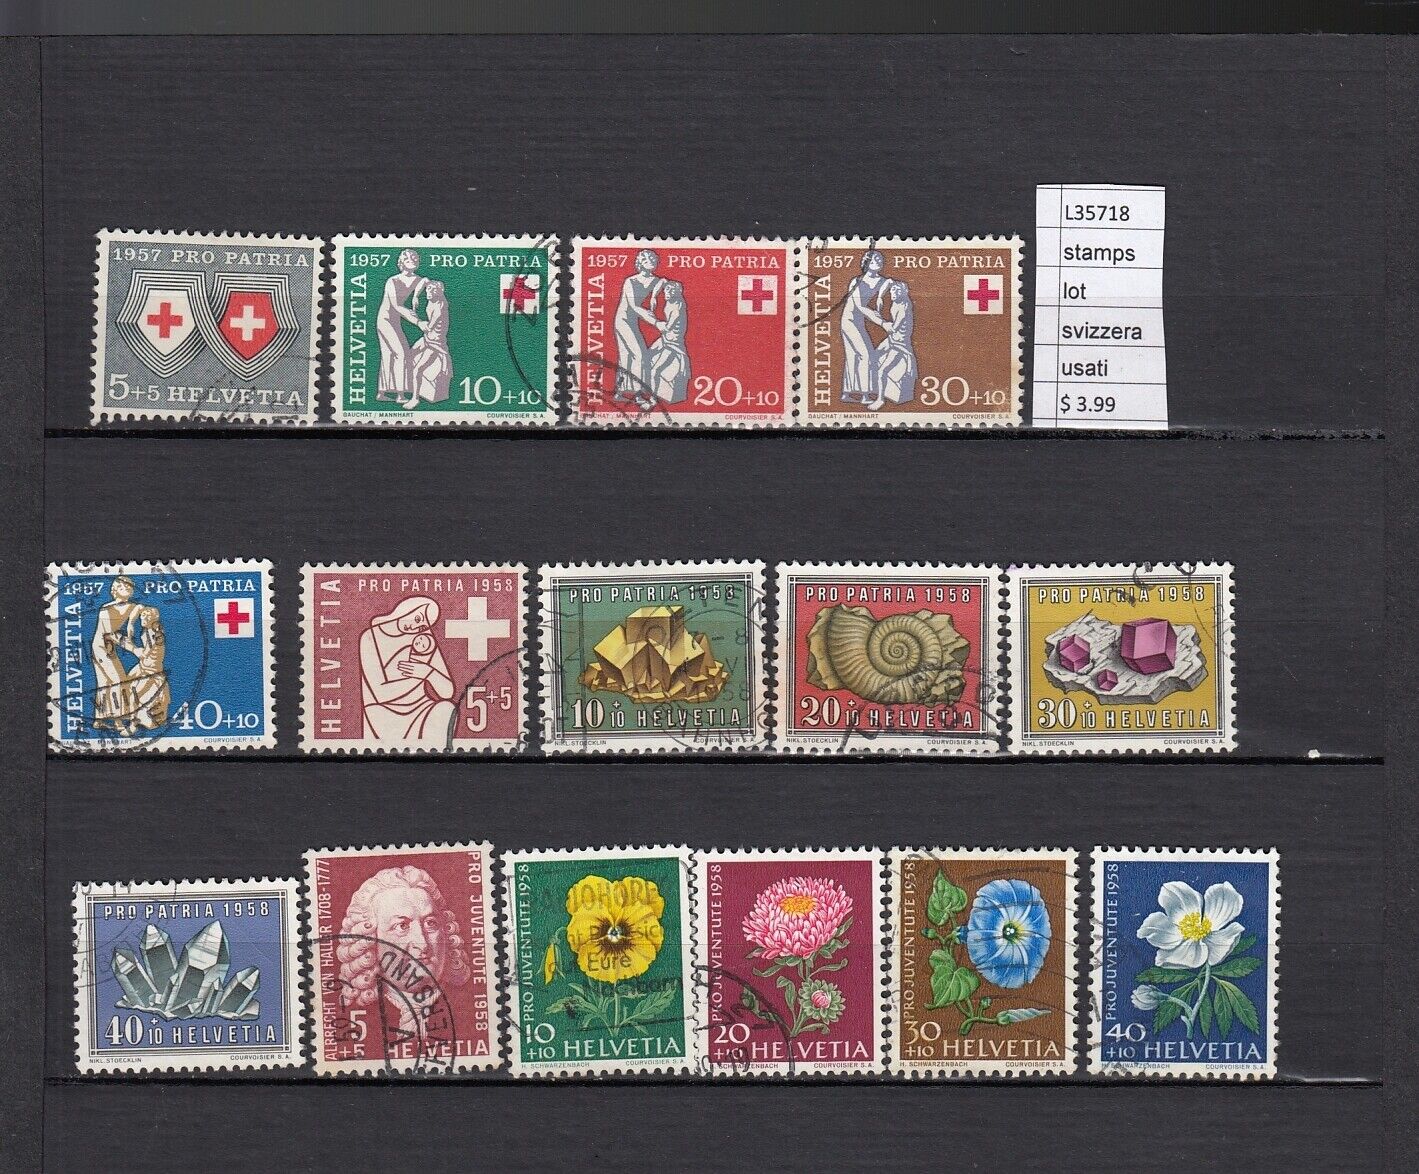 STAMPS LOT Max 47% OFF SWITZERLAND L35718 Outlet SALE USED